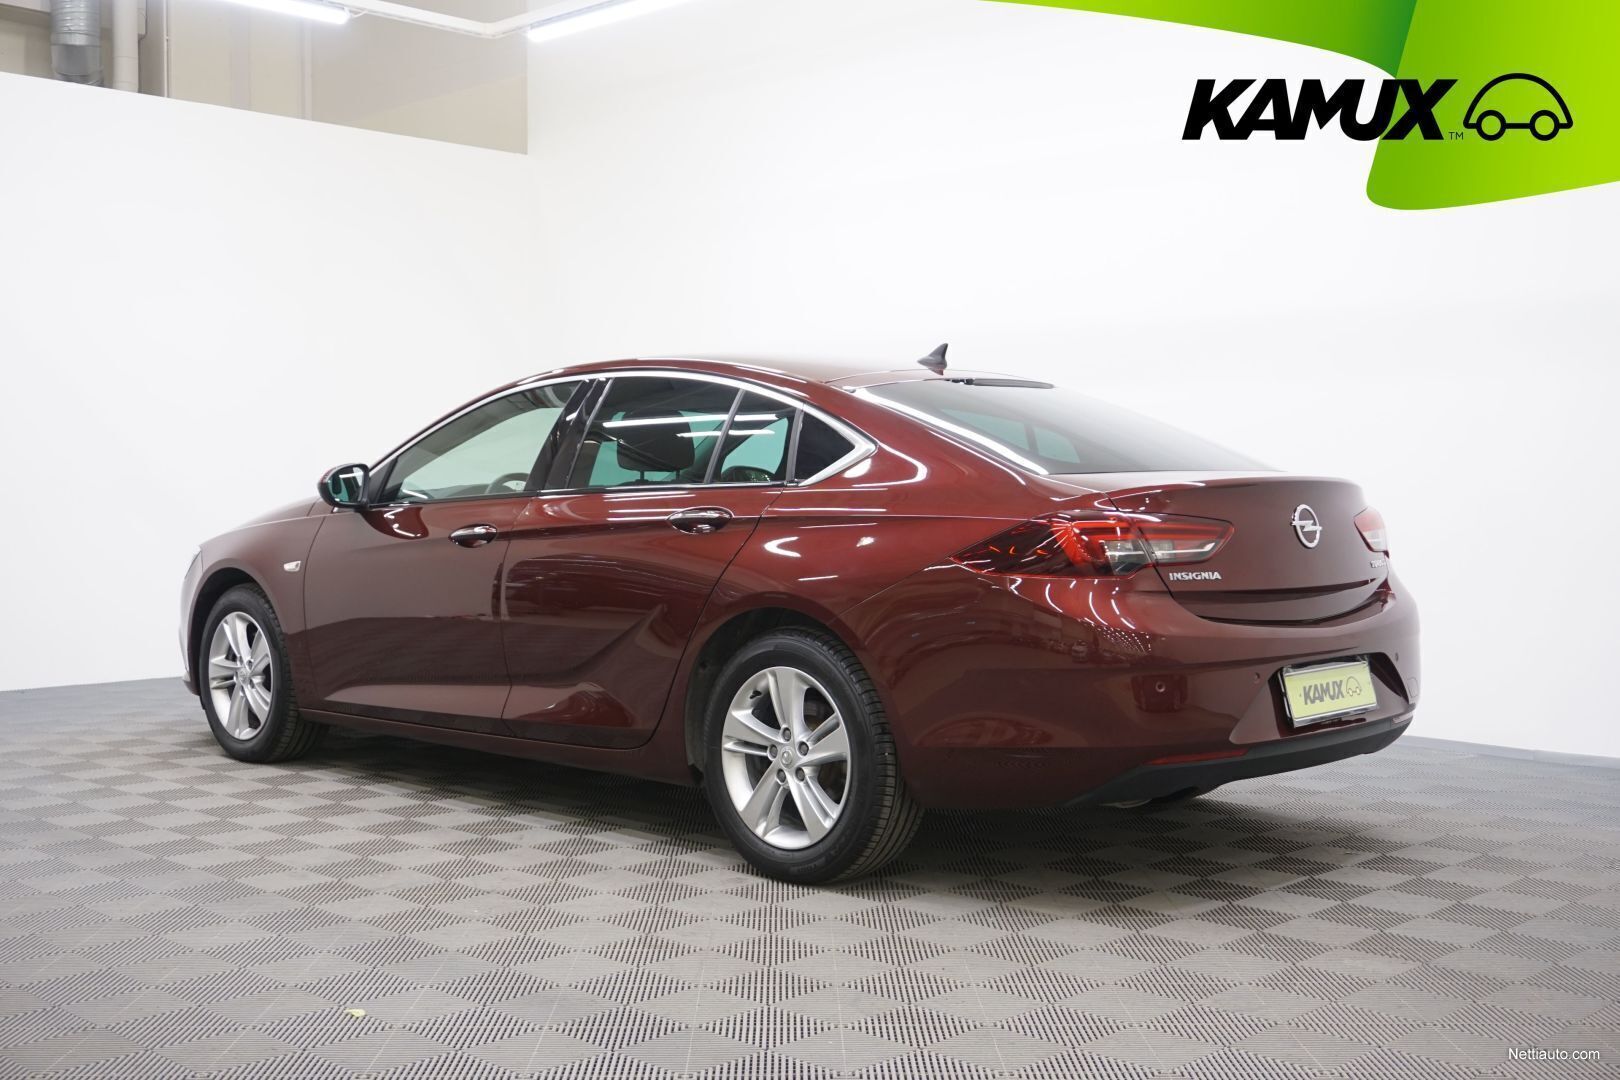 Opel Insignia Innovation Auto Full LED 1.Hand à PL-43-100 Tychy Pologne